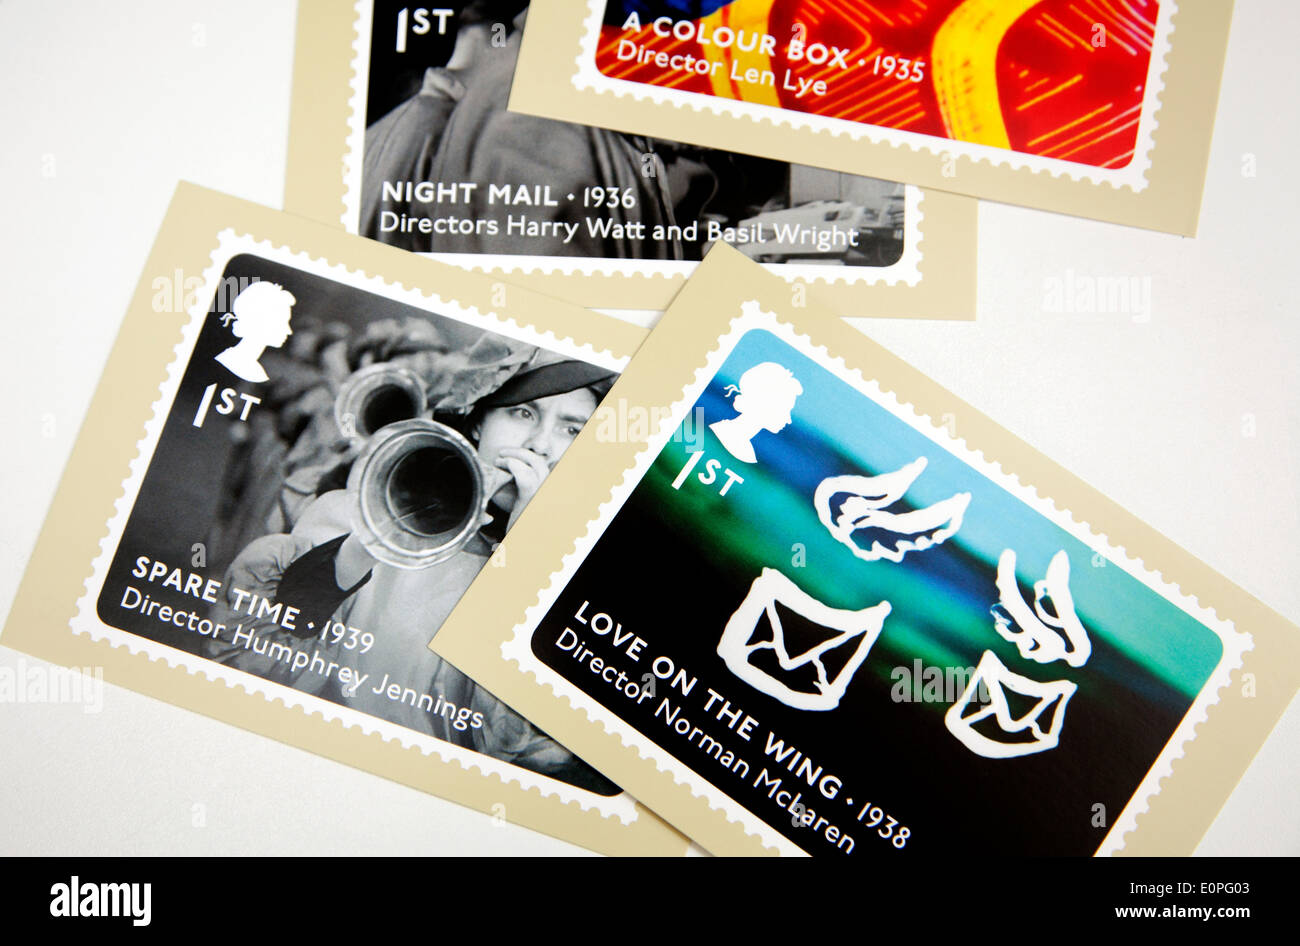 GPO Film Unit commemorated on Royal Mail stamps May 2014, London Stock Photo